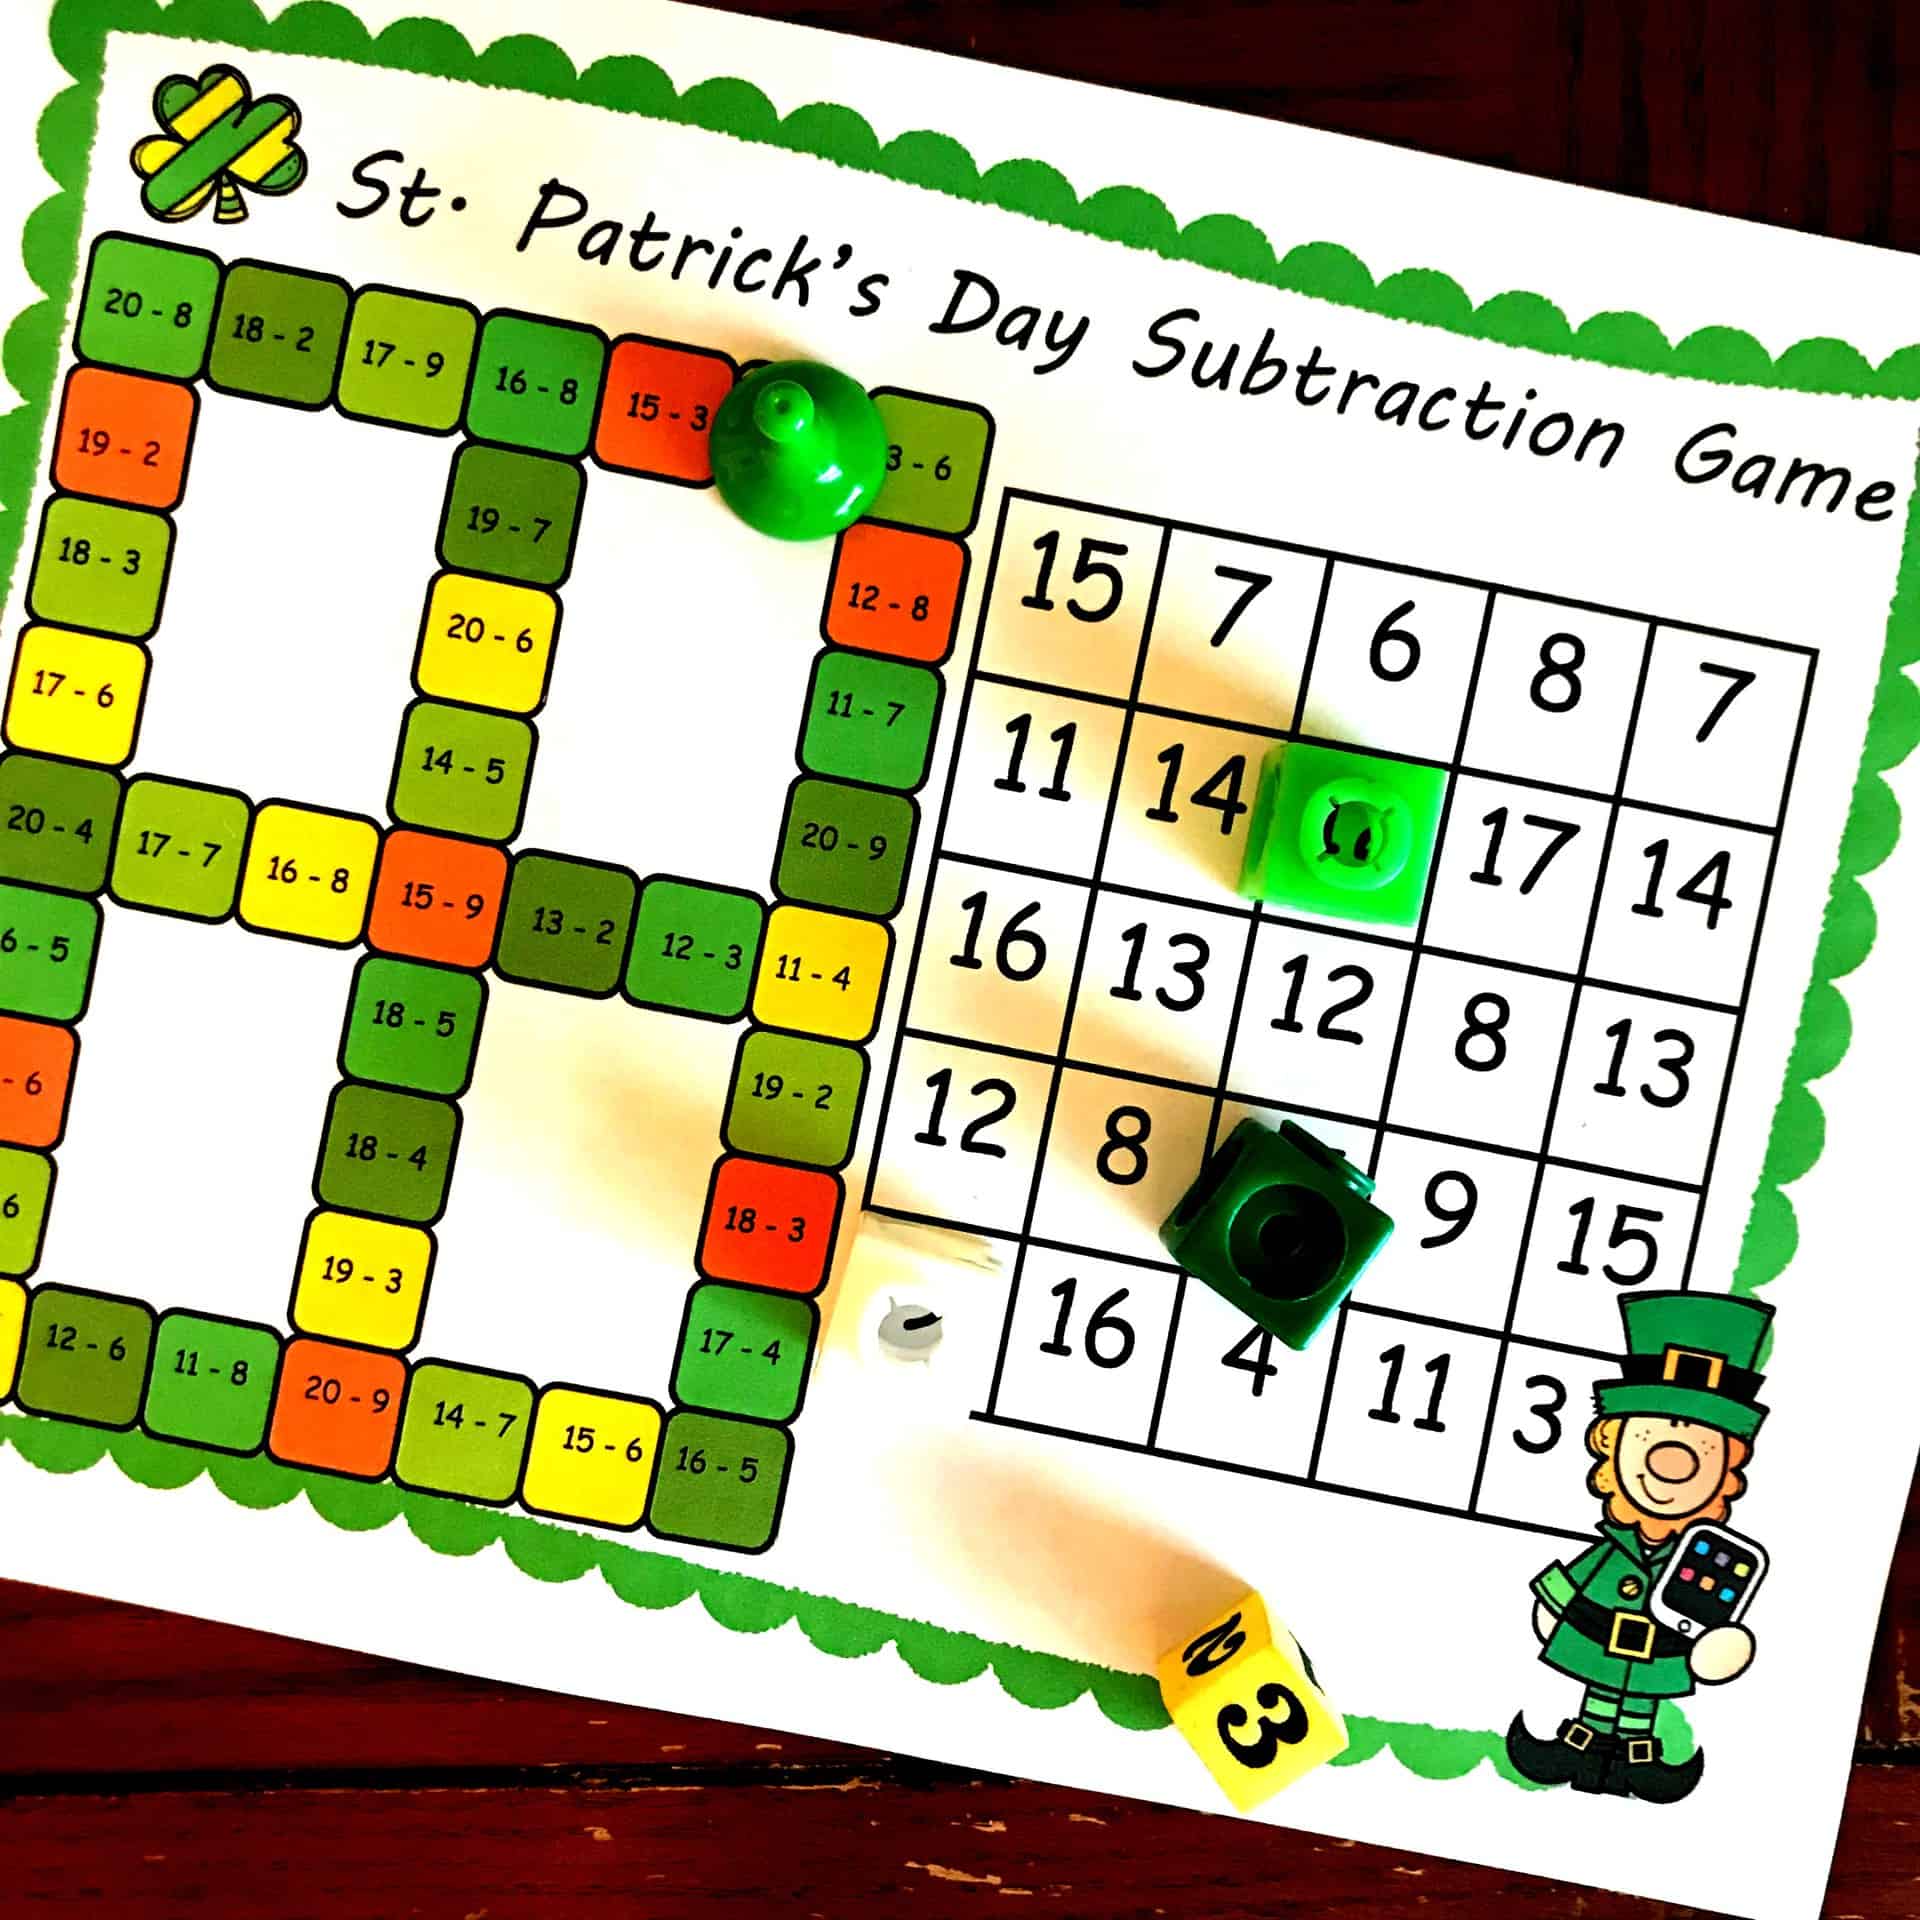 FREE No-Prep Subtraction Game with St. Patrick’s Day Theme